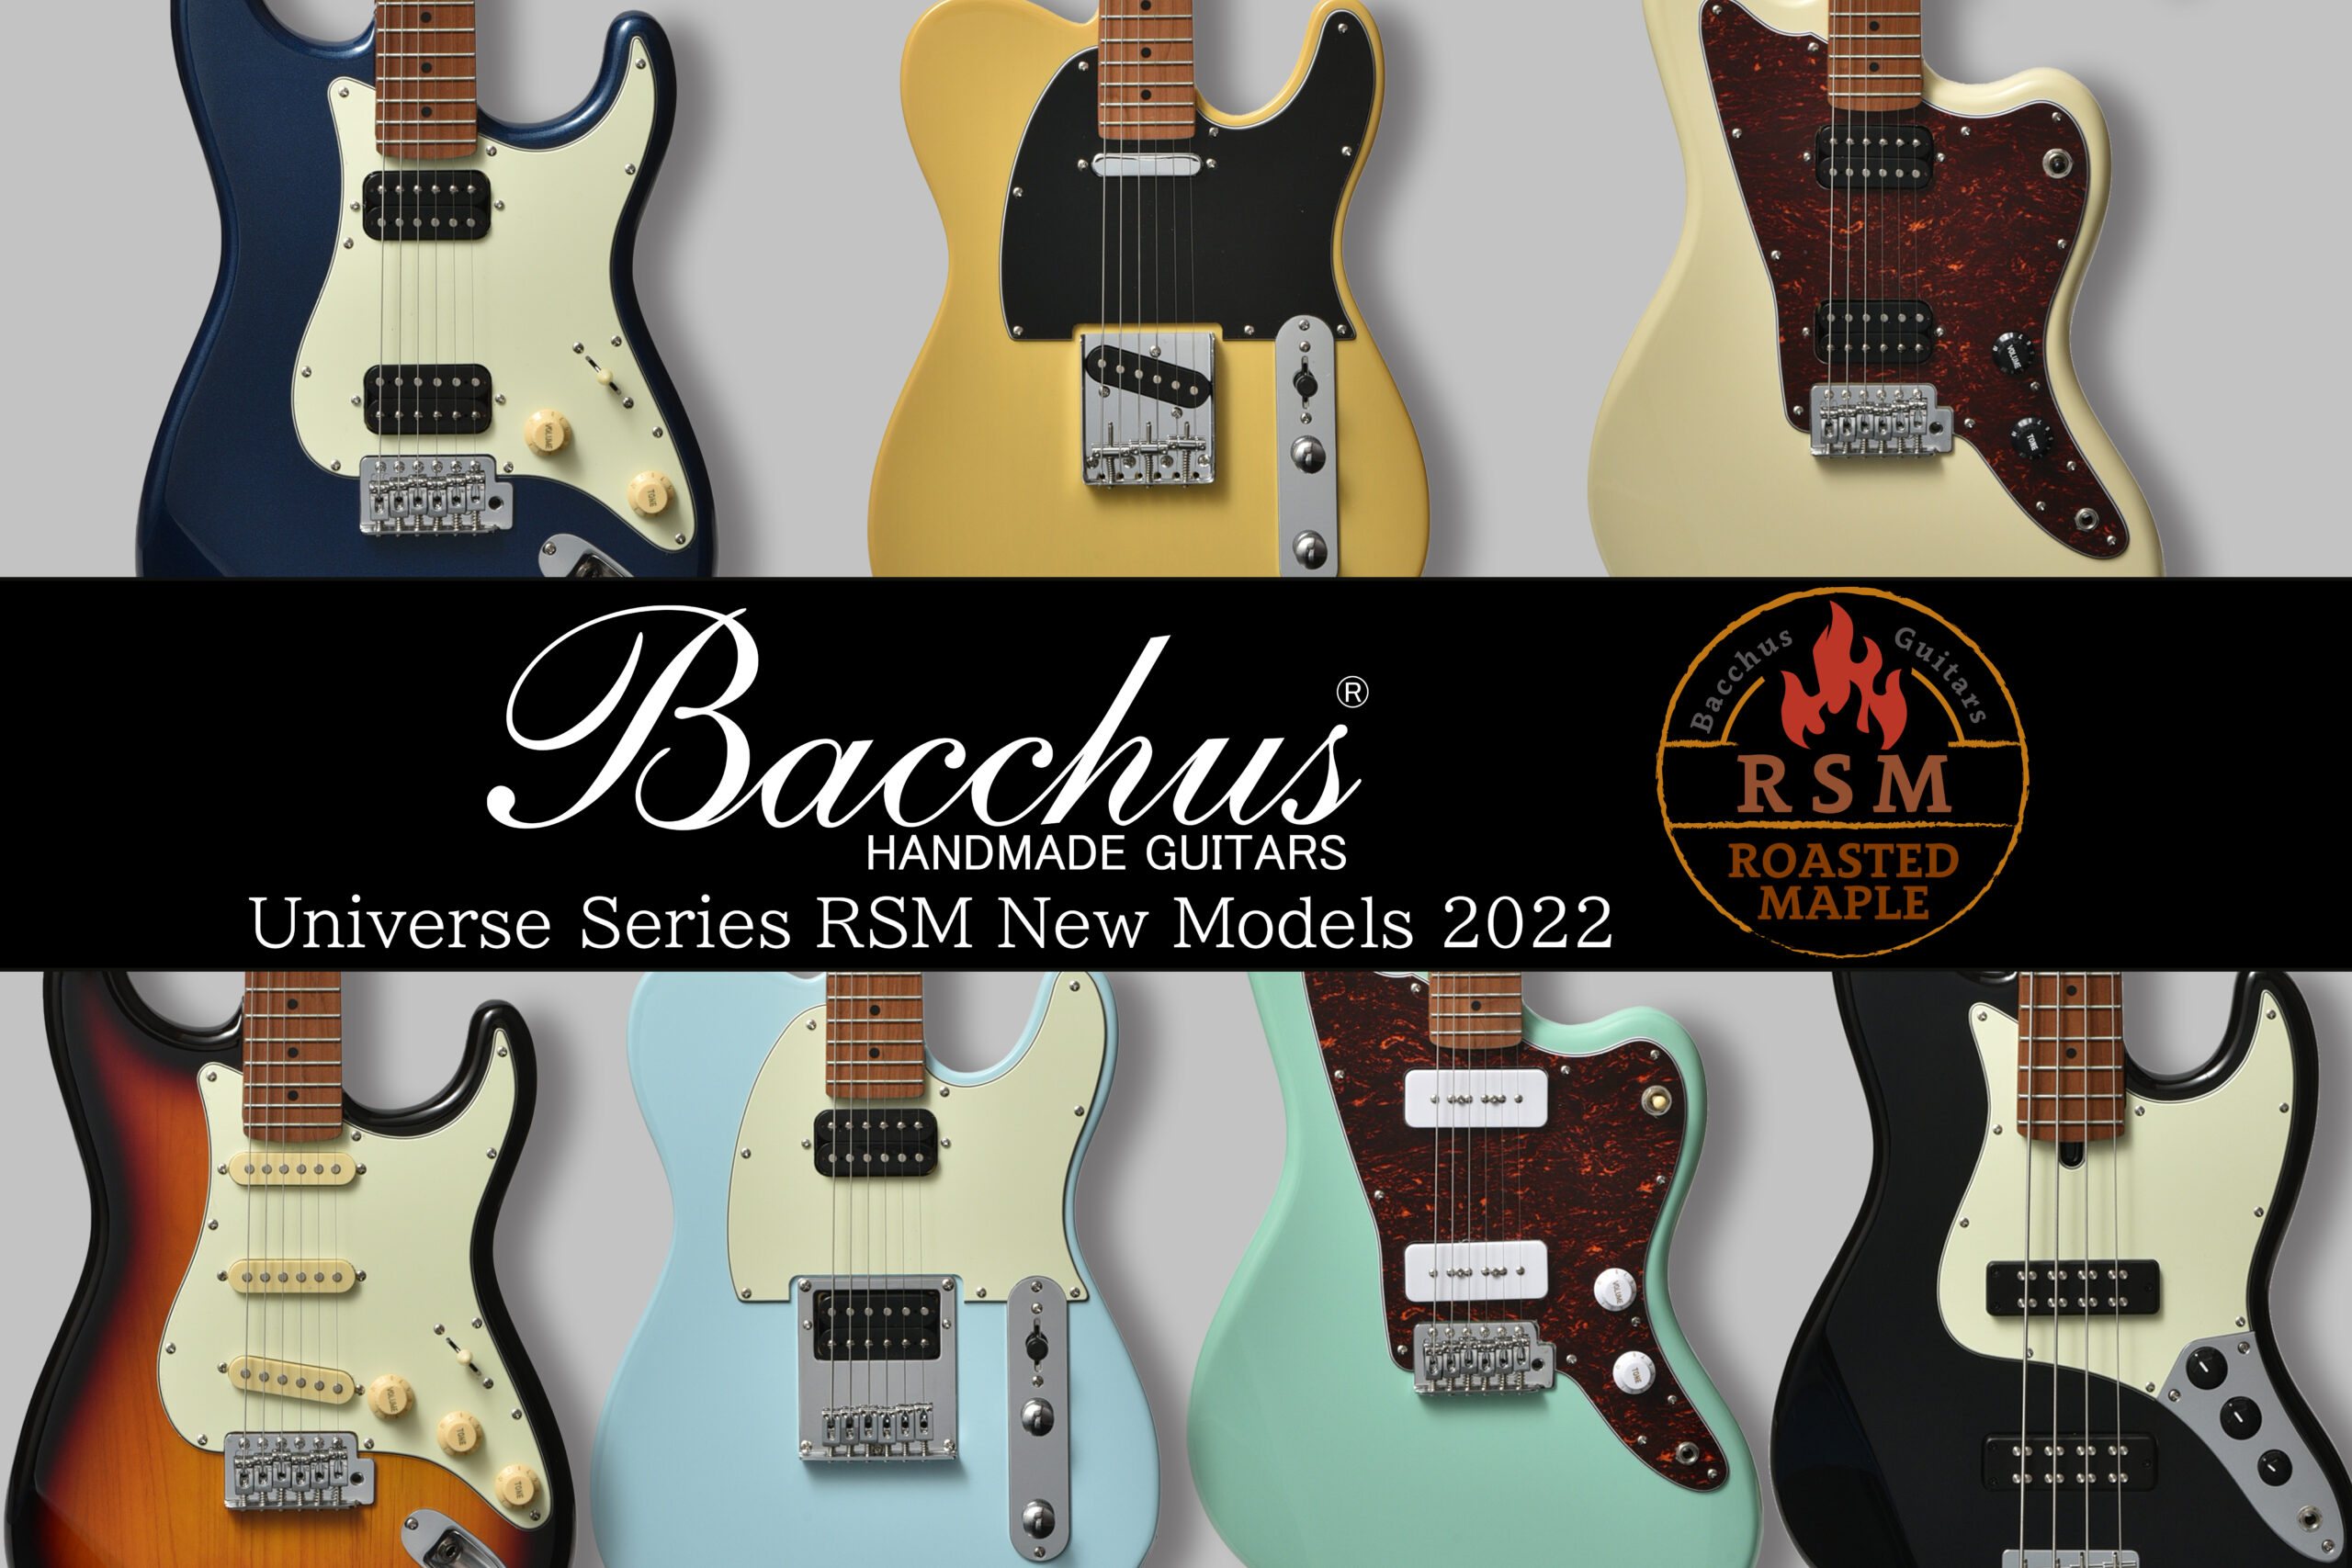 Getting the 2022 RSM series' models ready for the world